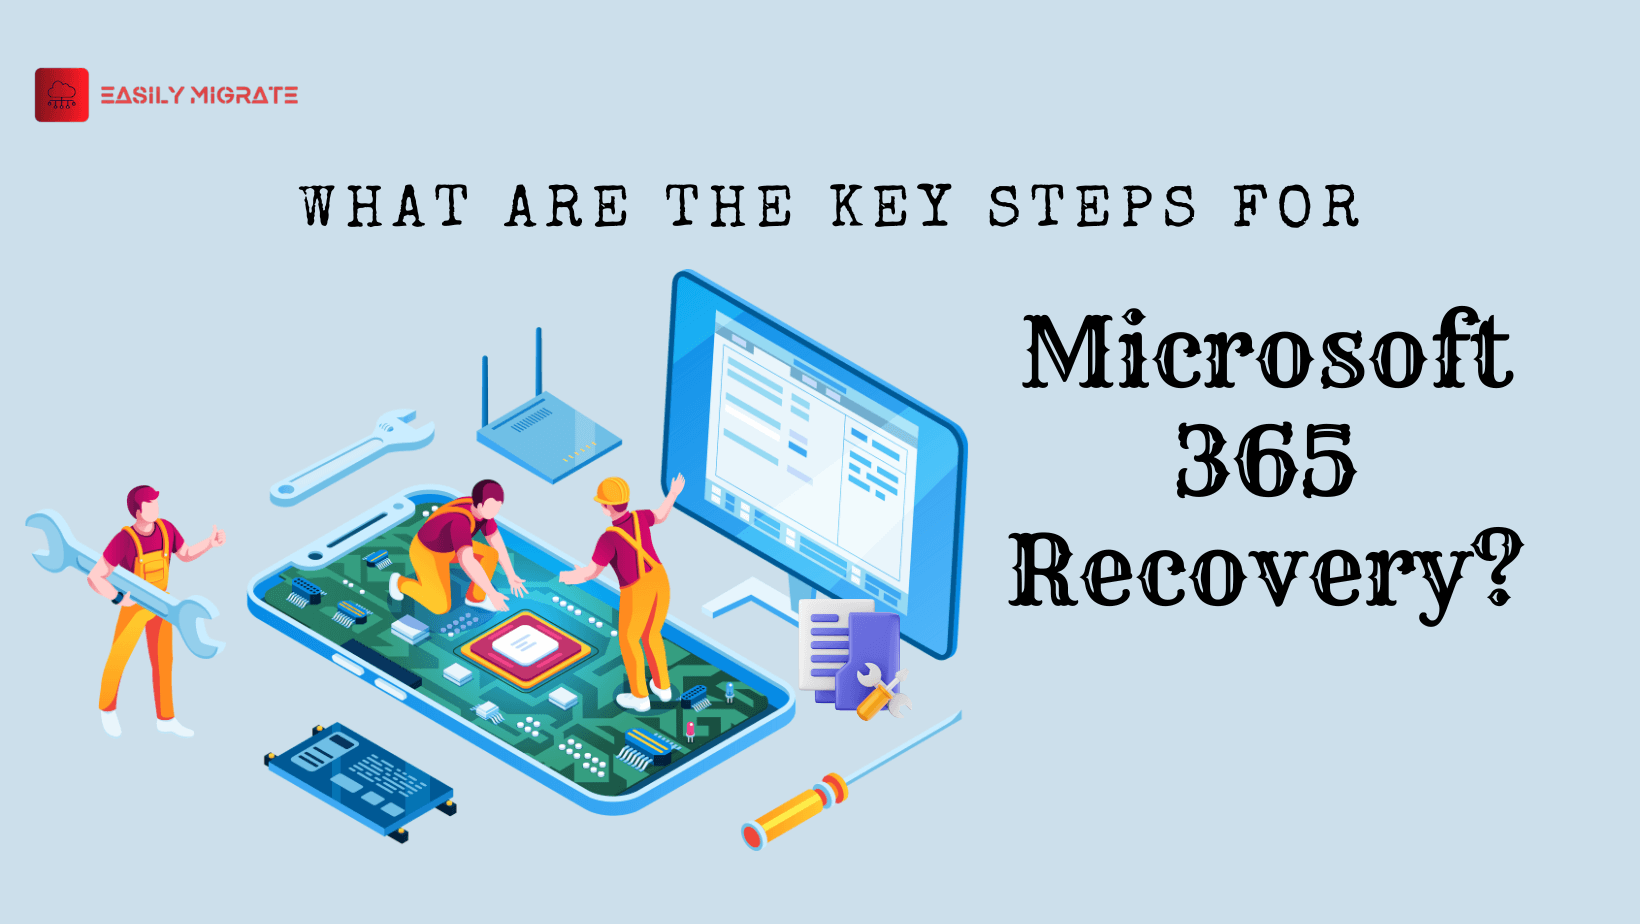 What are the Key Steps for Microsoft 365 Recovery?